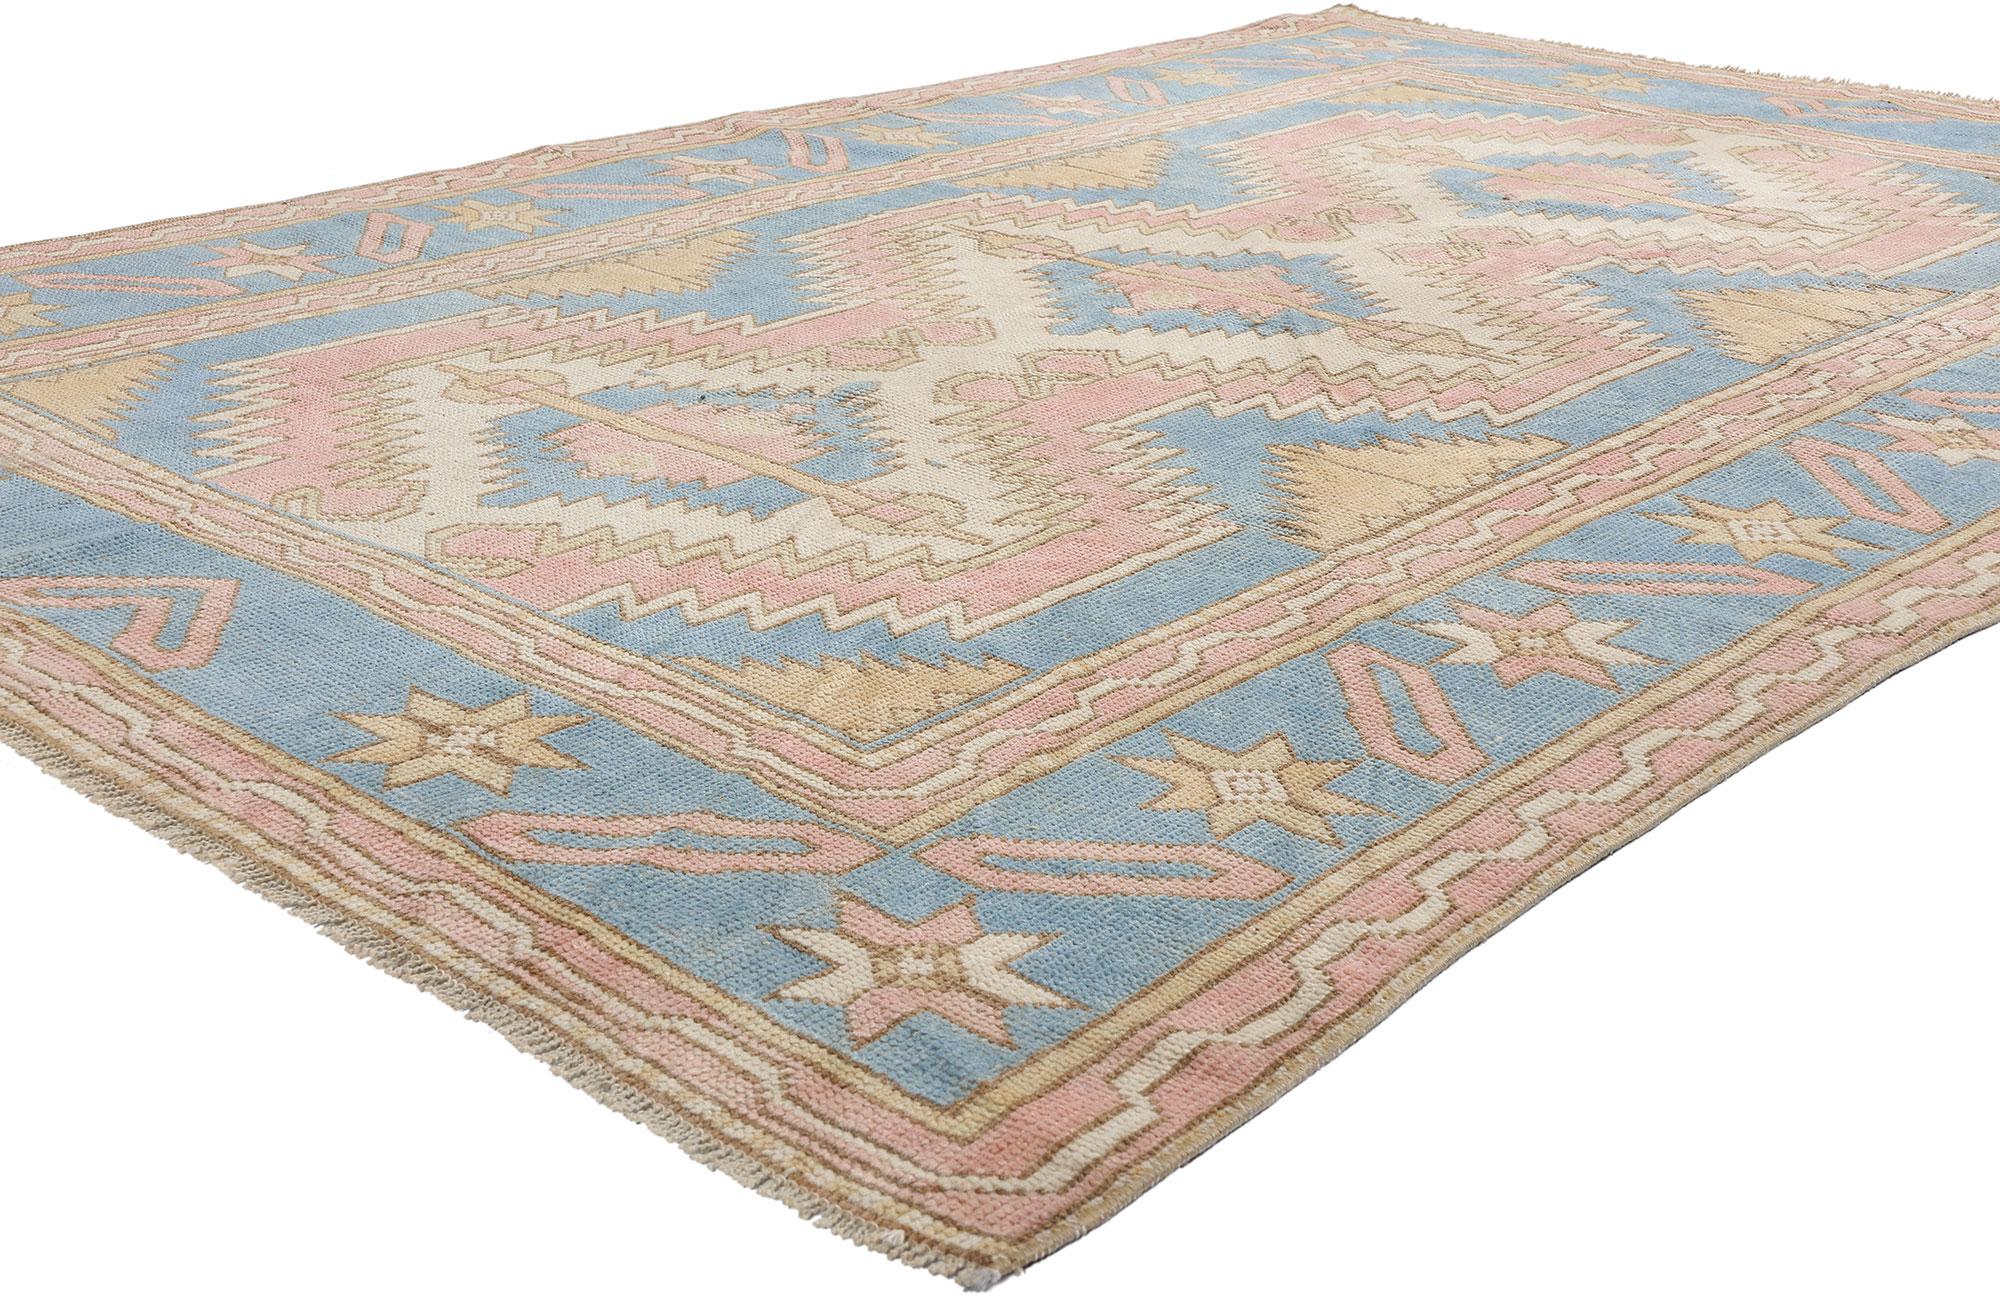 53939 Vintage Pink Turkish Oushak Rug, 04'11 x 07'02. Antique-washed Turkish Oushak rugs undergo a unique washing process distinguishing them by soft, muted hues. The goal is to emulate the natural weathering and aging that occurs over time,